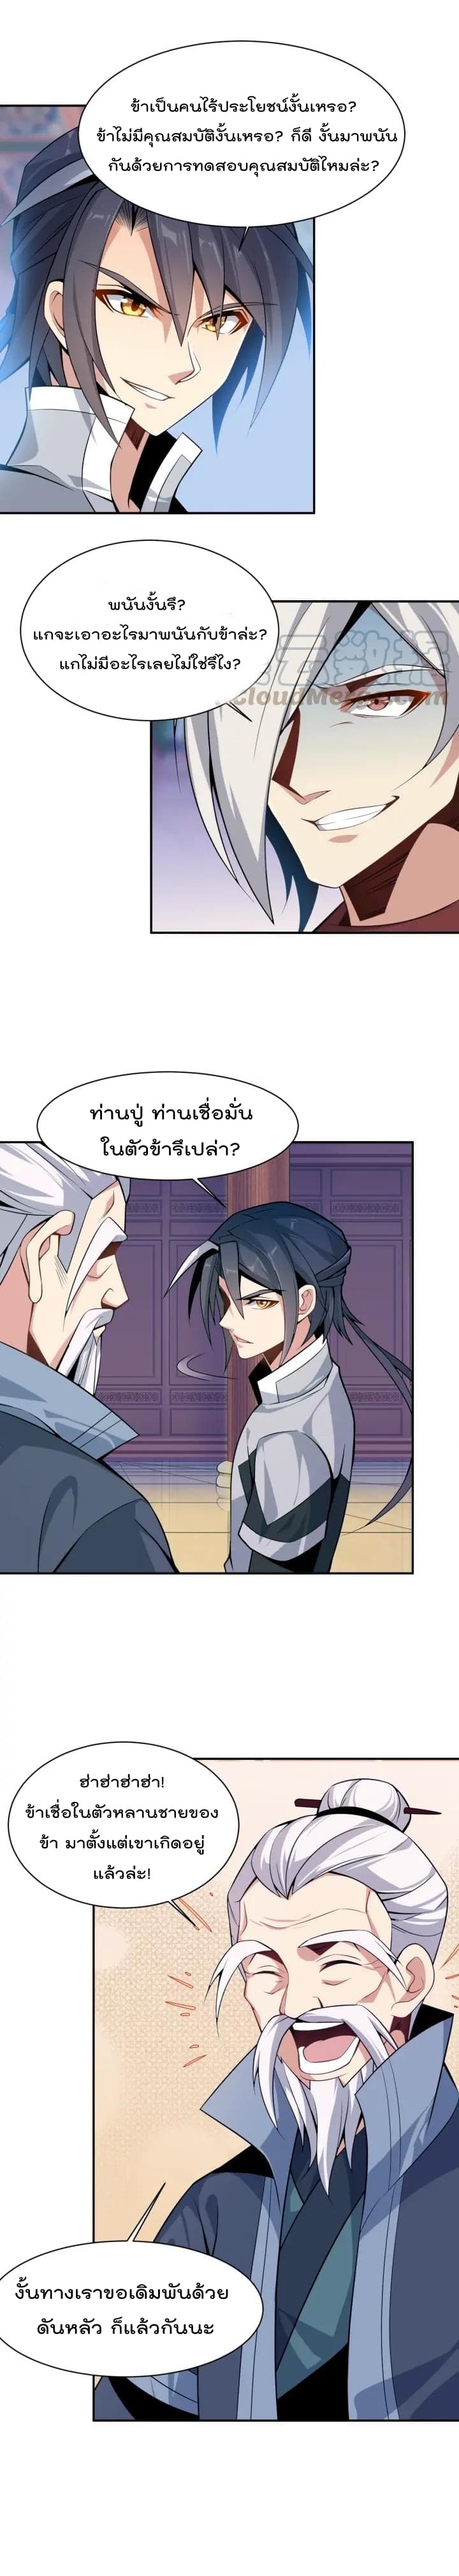 Swallow the Whole World ตอนที่4 (13)